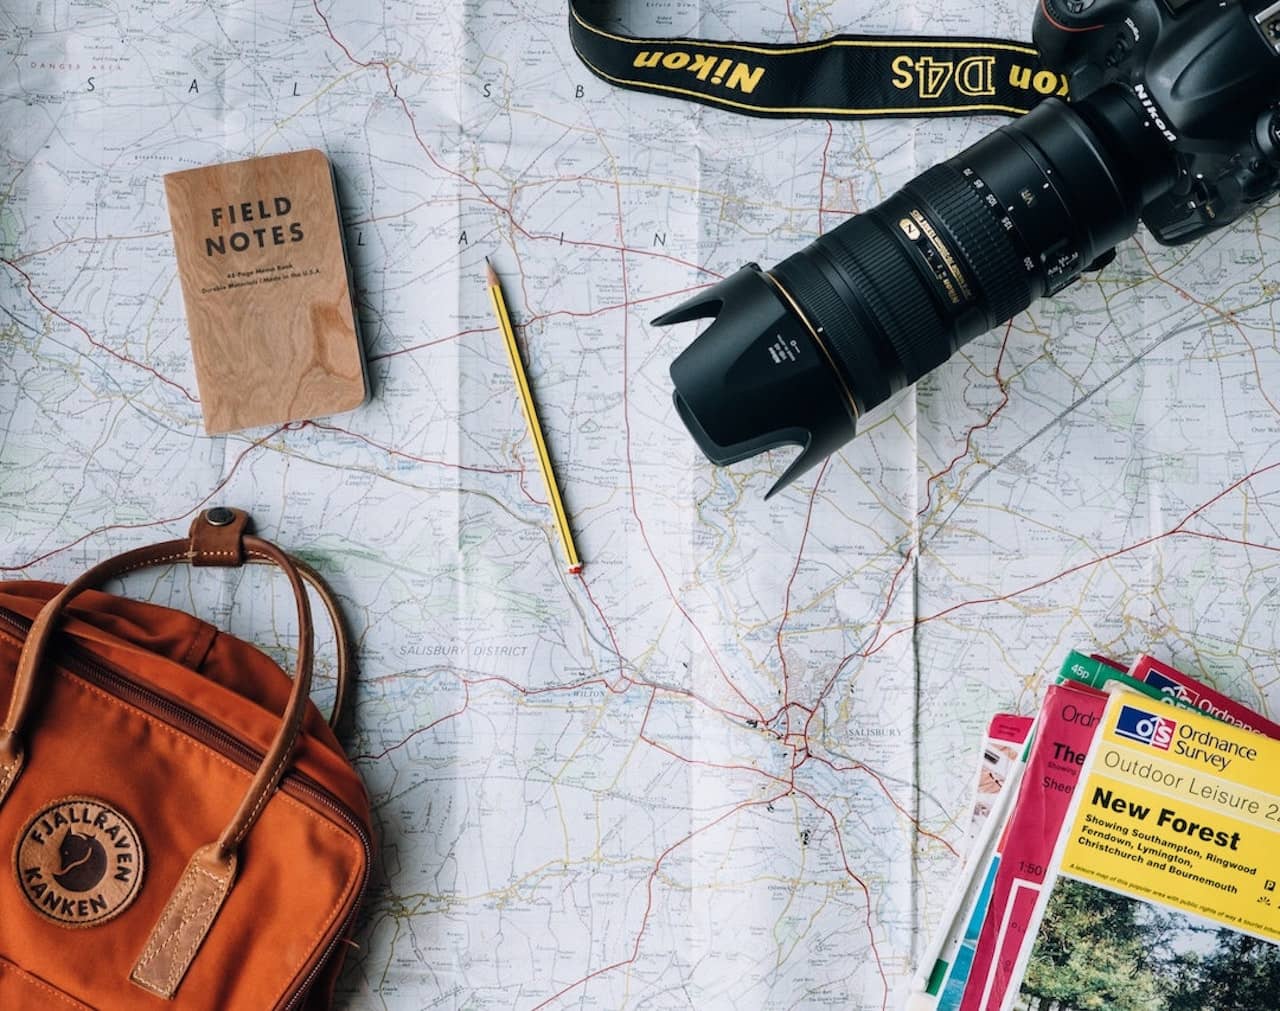 Image of map, camera and guides.